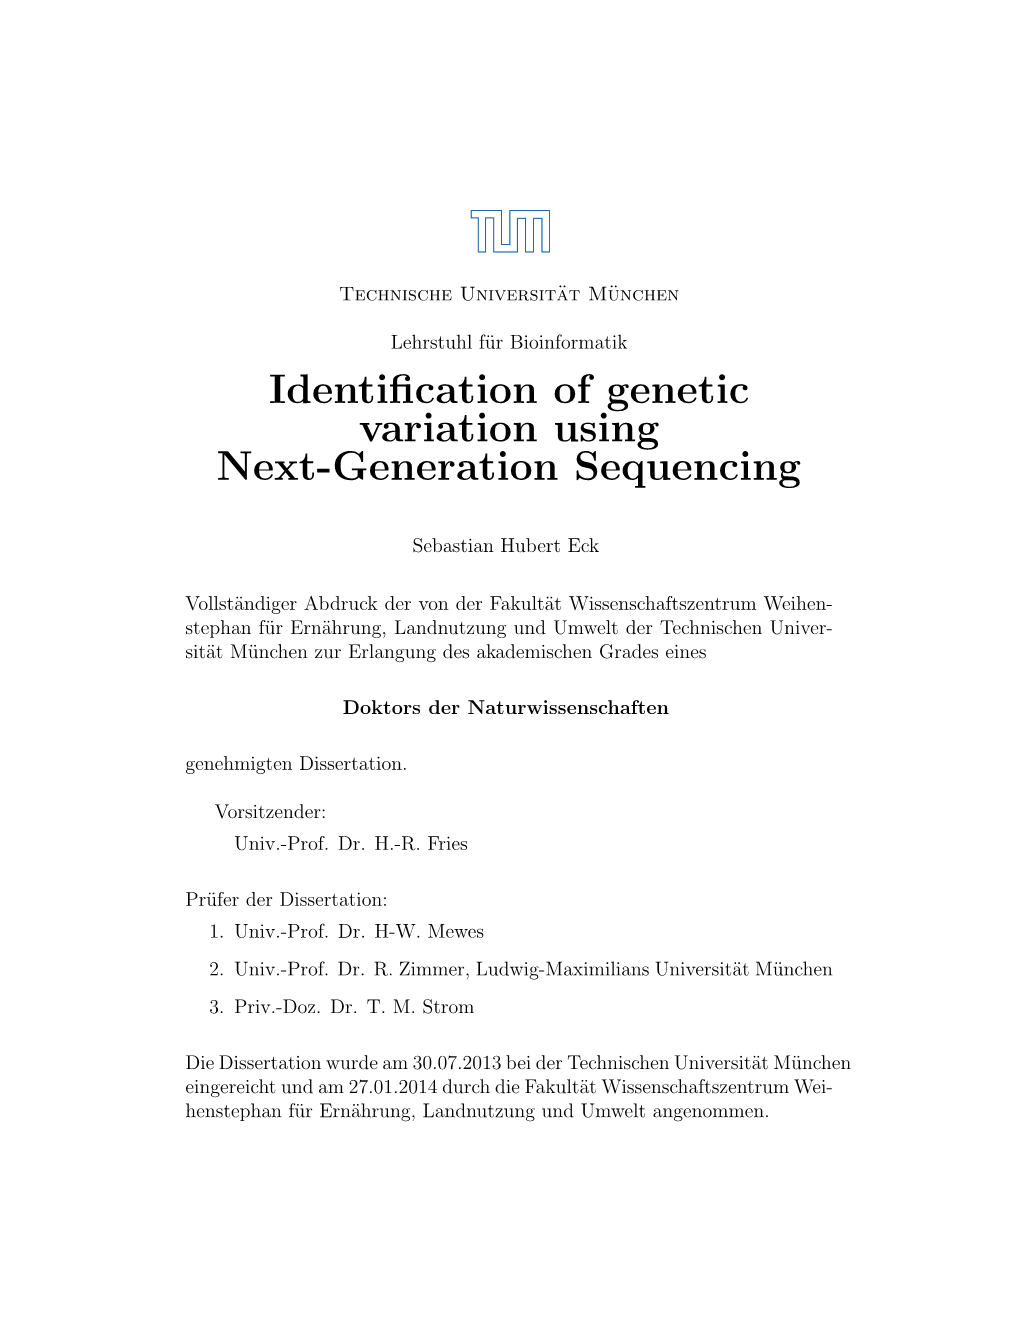 Identification of Genetic Variation Using Next-Generation Sequencing